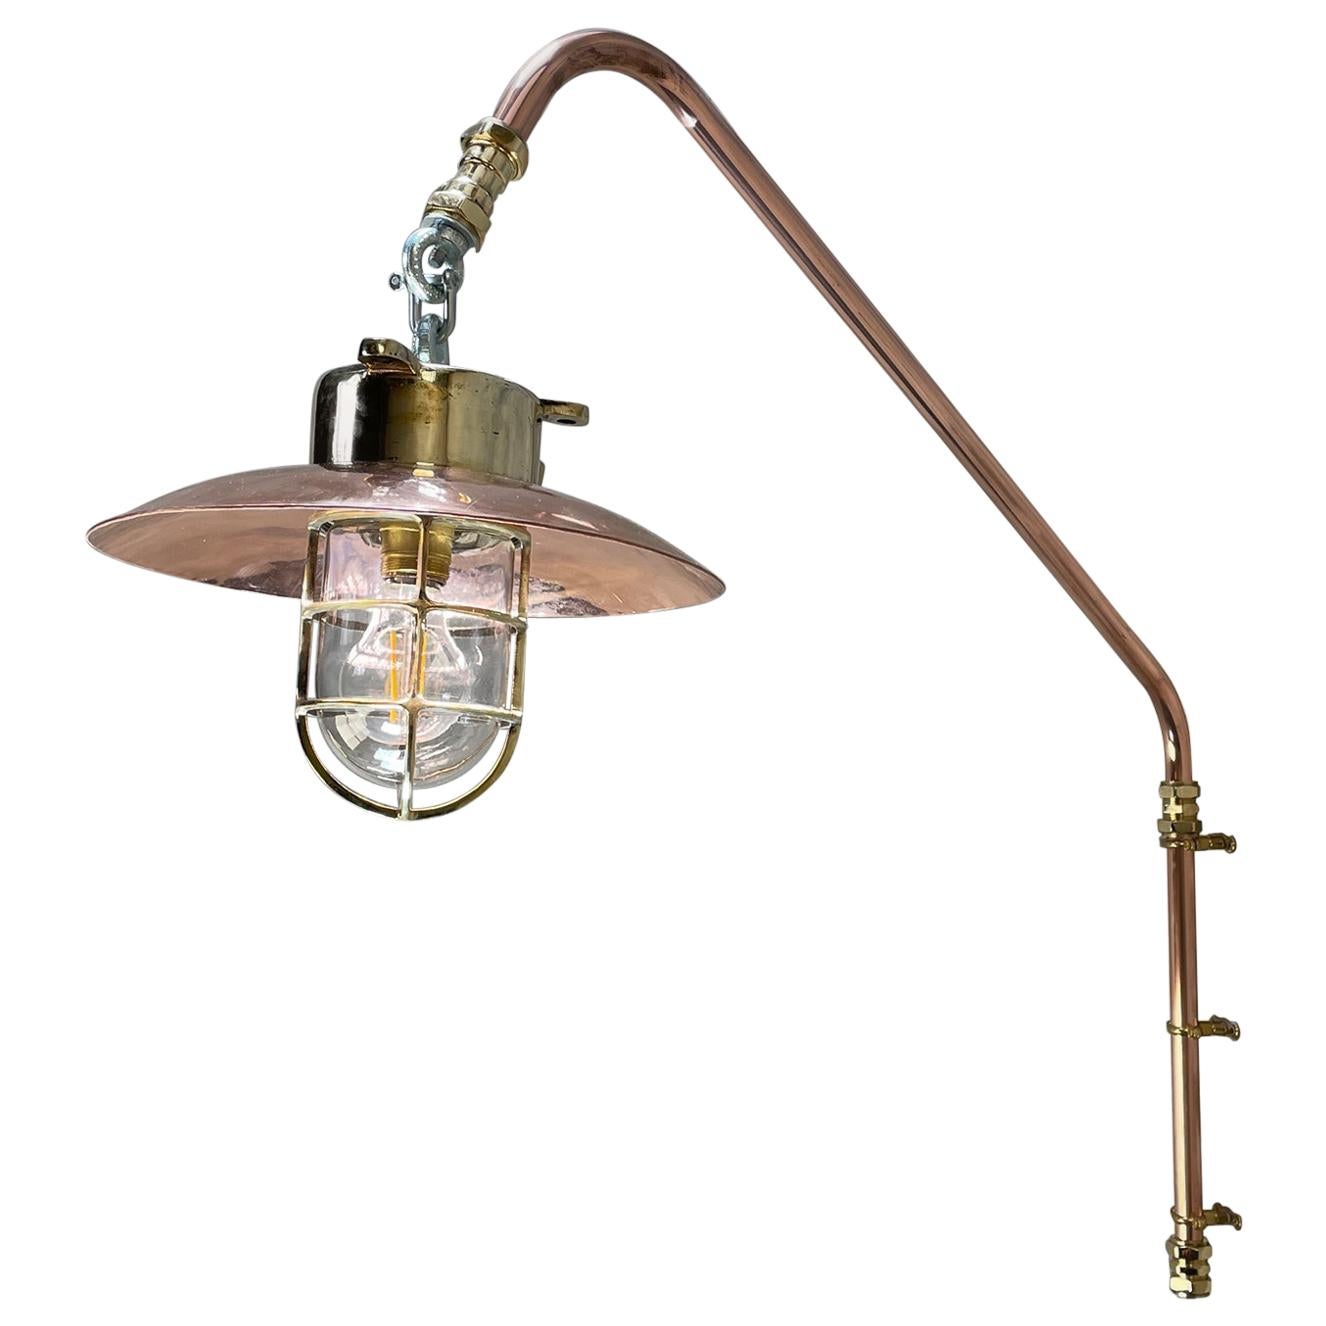 1970s Copper & Brass Cantilever Explosion Proof Pendant Lamp with Cage and Shade